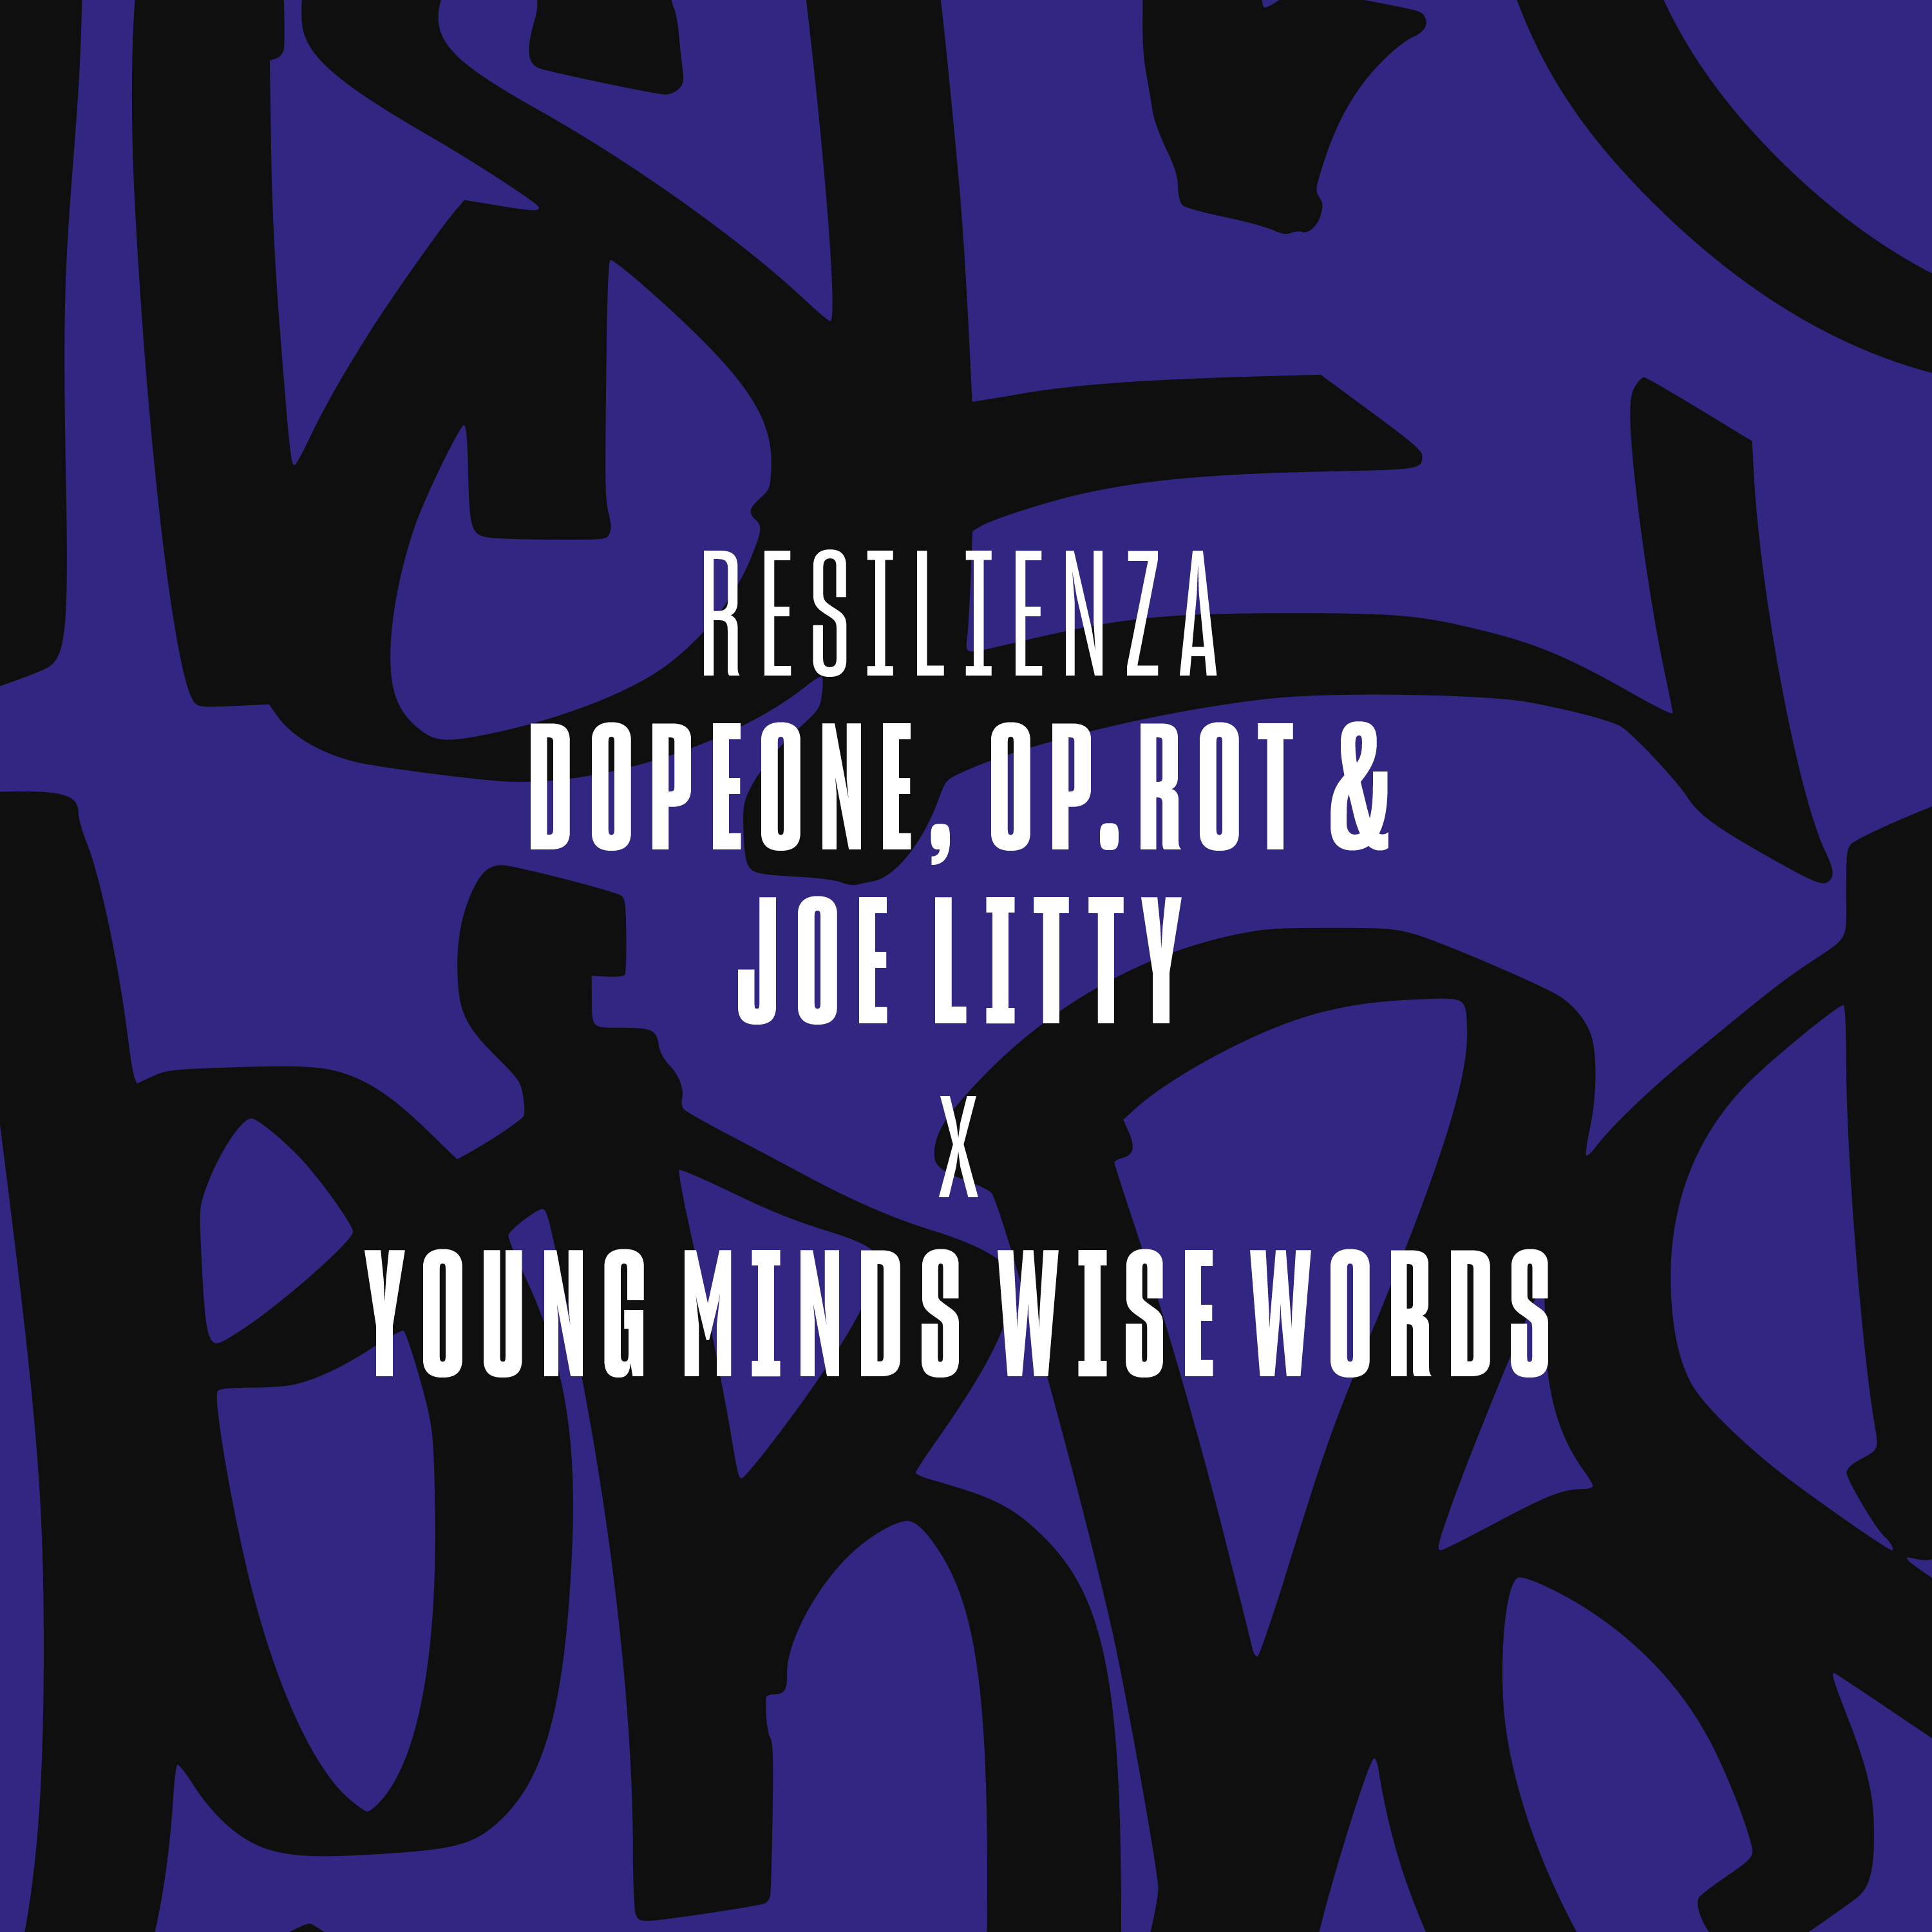 Young Minds Wise Words with OP.ROT, Dope One, Joe Litty - Resilienza